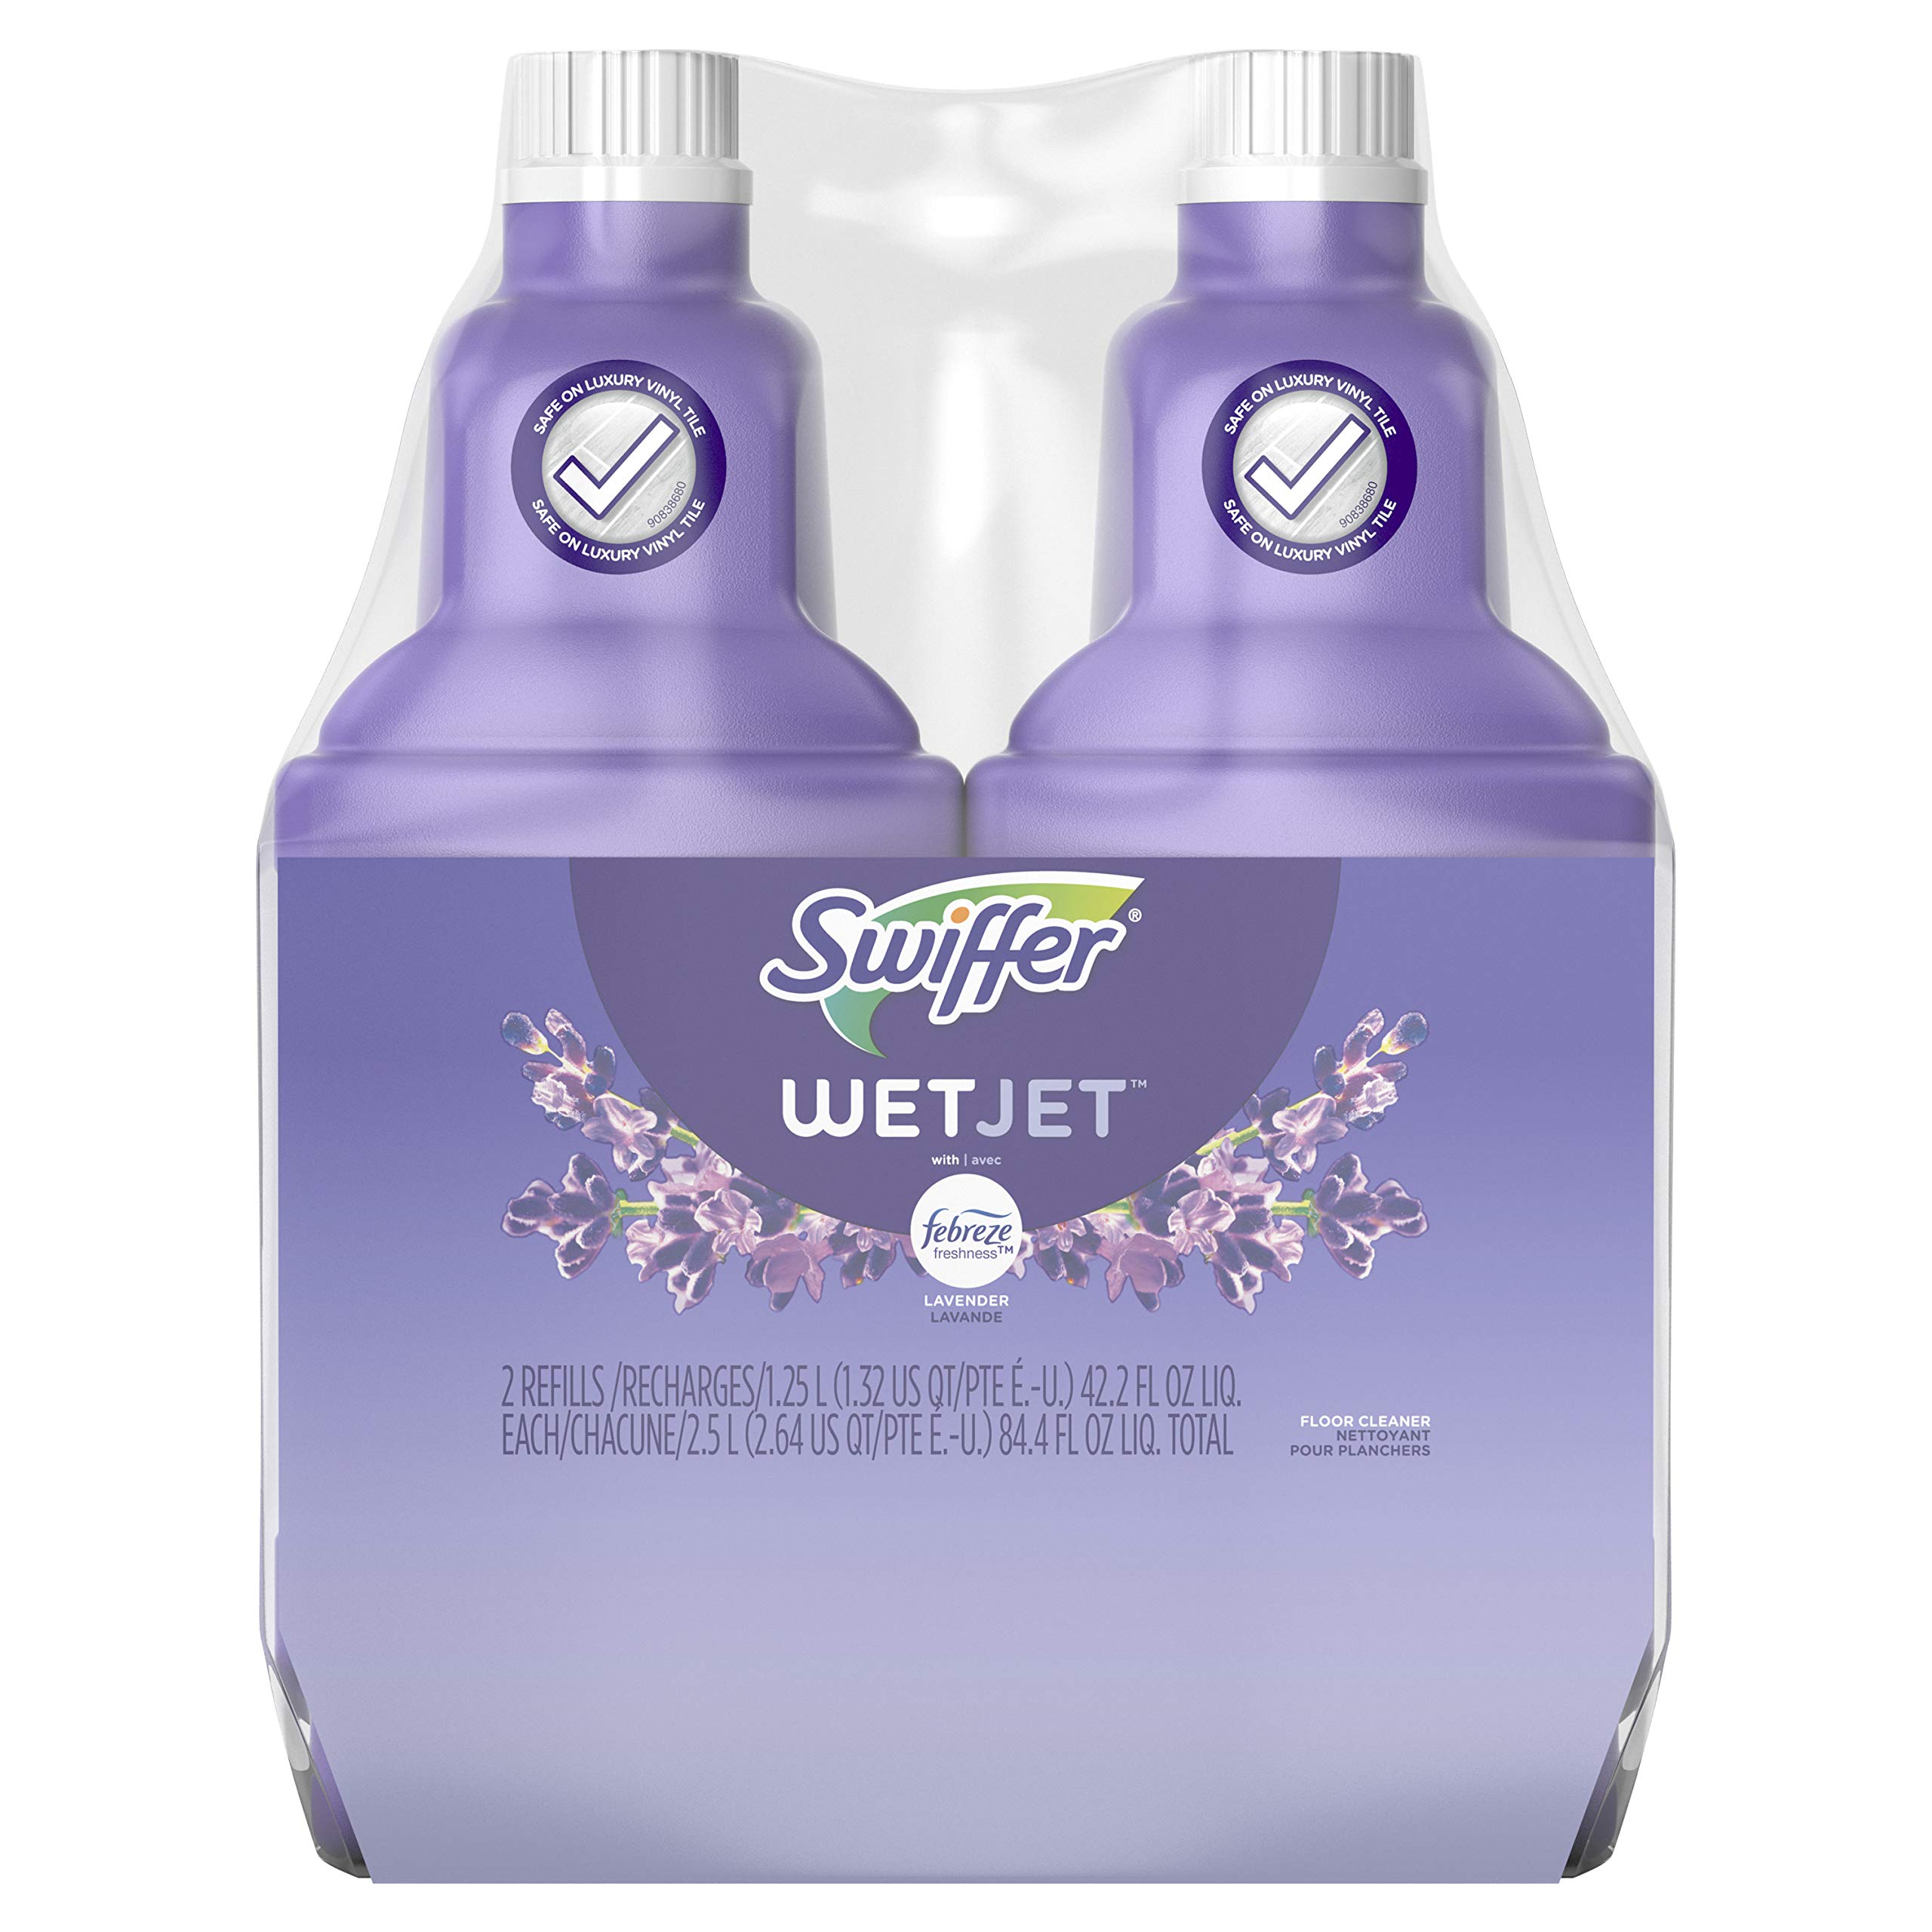 2 pack 1.25 liter Swiffer WetJet Multi-Purpose Floor Cleaner Solution with Febreze Refill, Lavender Vanilla and Comfort Scent: $6.76 or lower